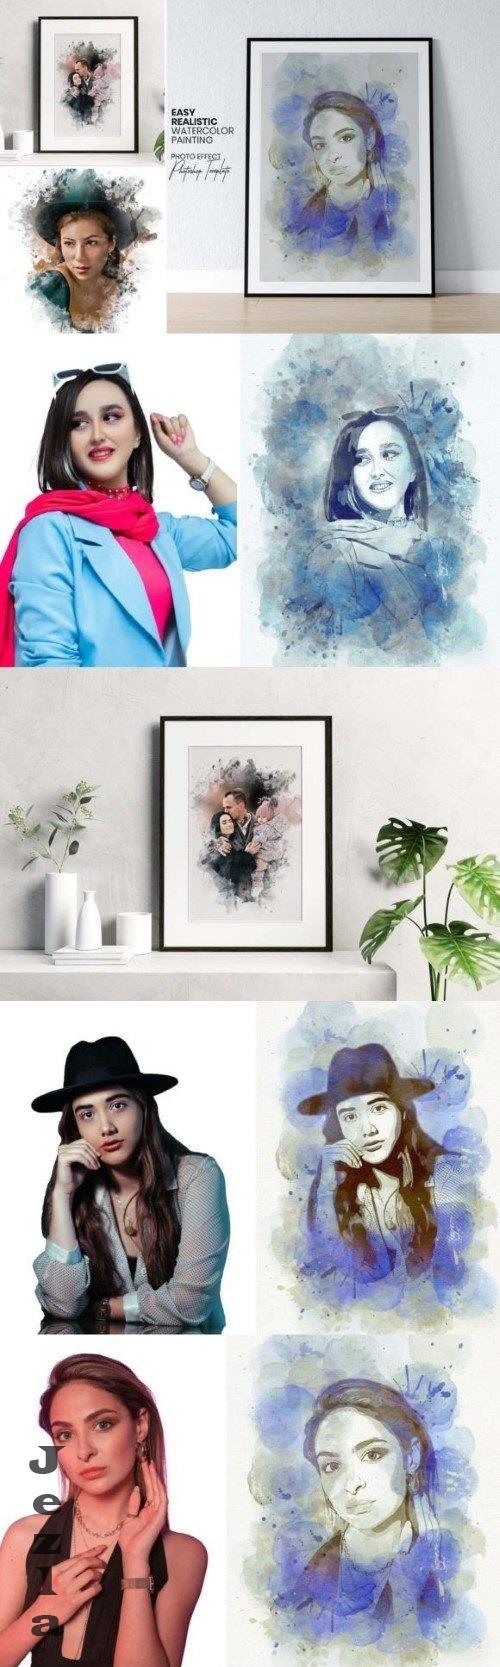 Easy Realistic Watercolor Painting - 21327947